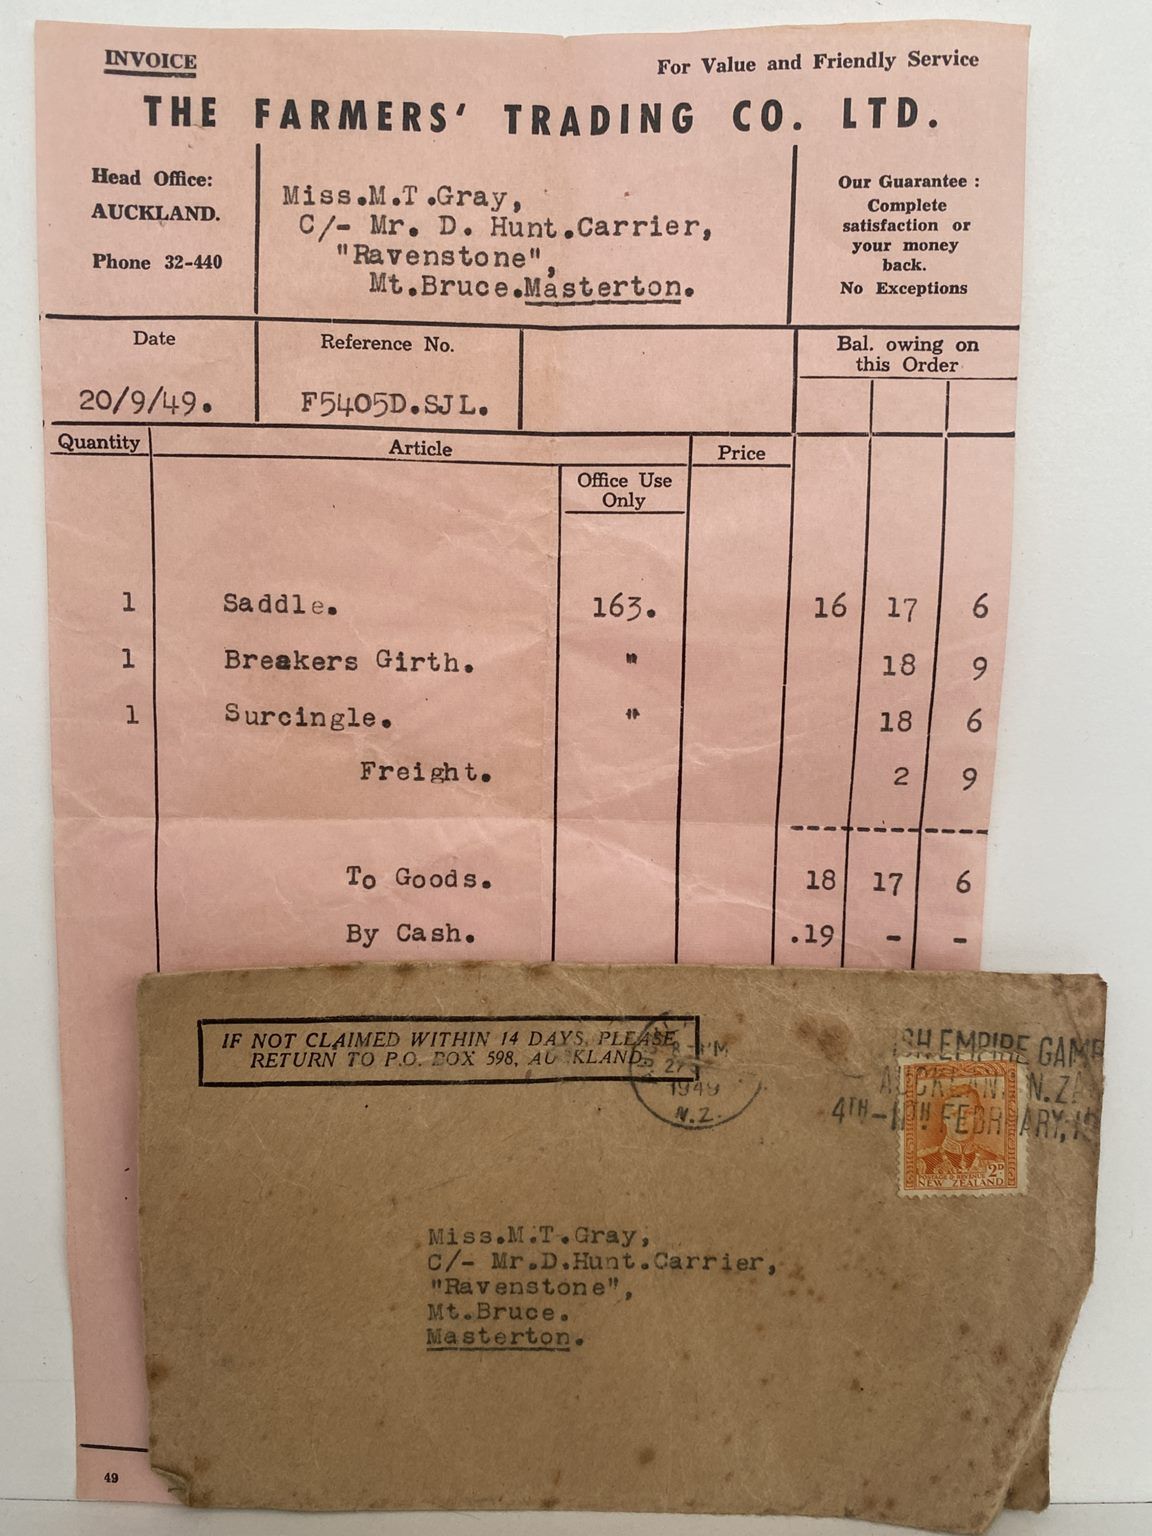 OLD INVOICE: The Farmer's Trading co. Ltd, Auckland 1949